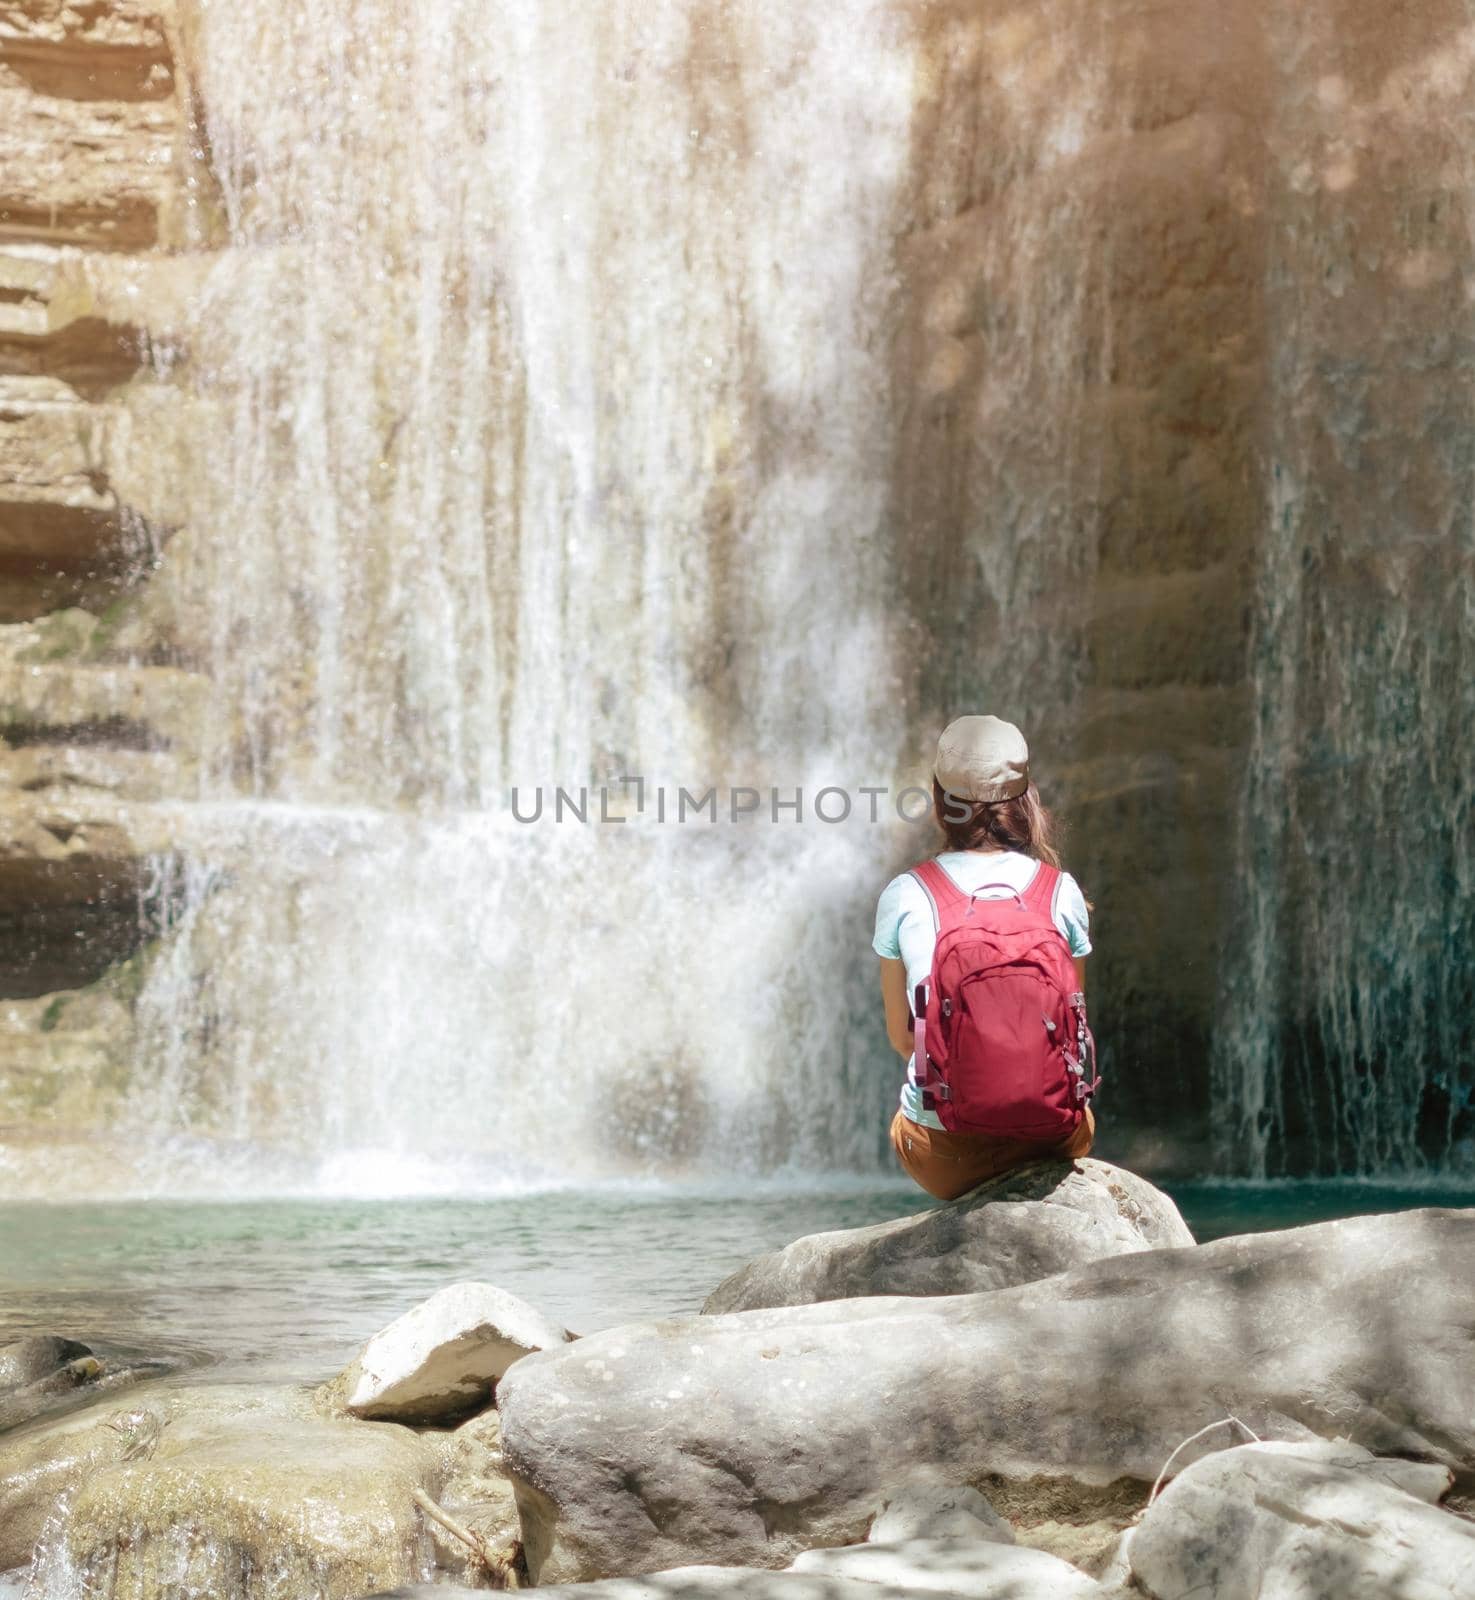 Female backpacker explorer sitting on stone and enjoying view of waterfall, rear view.